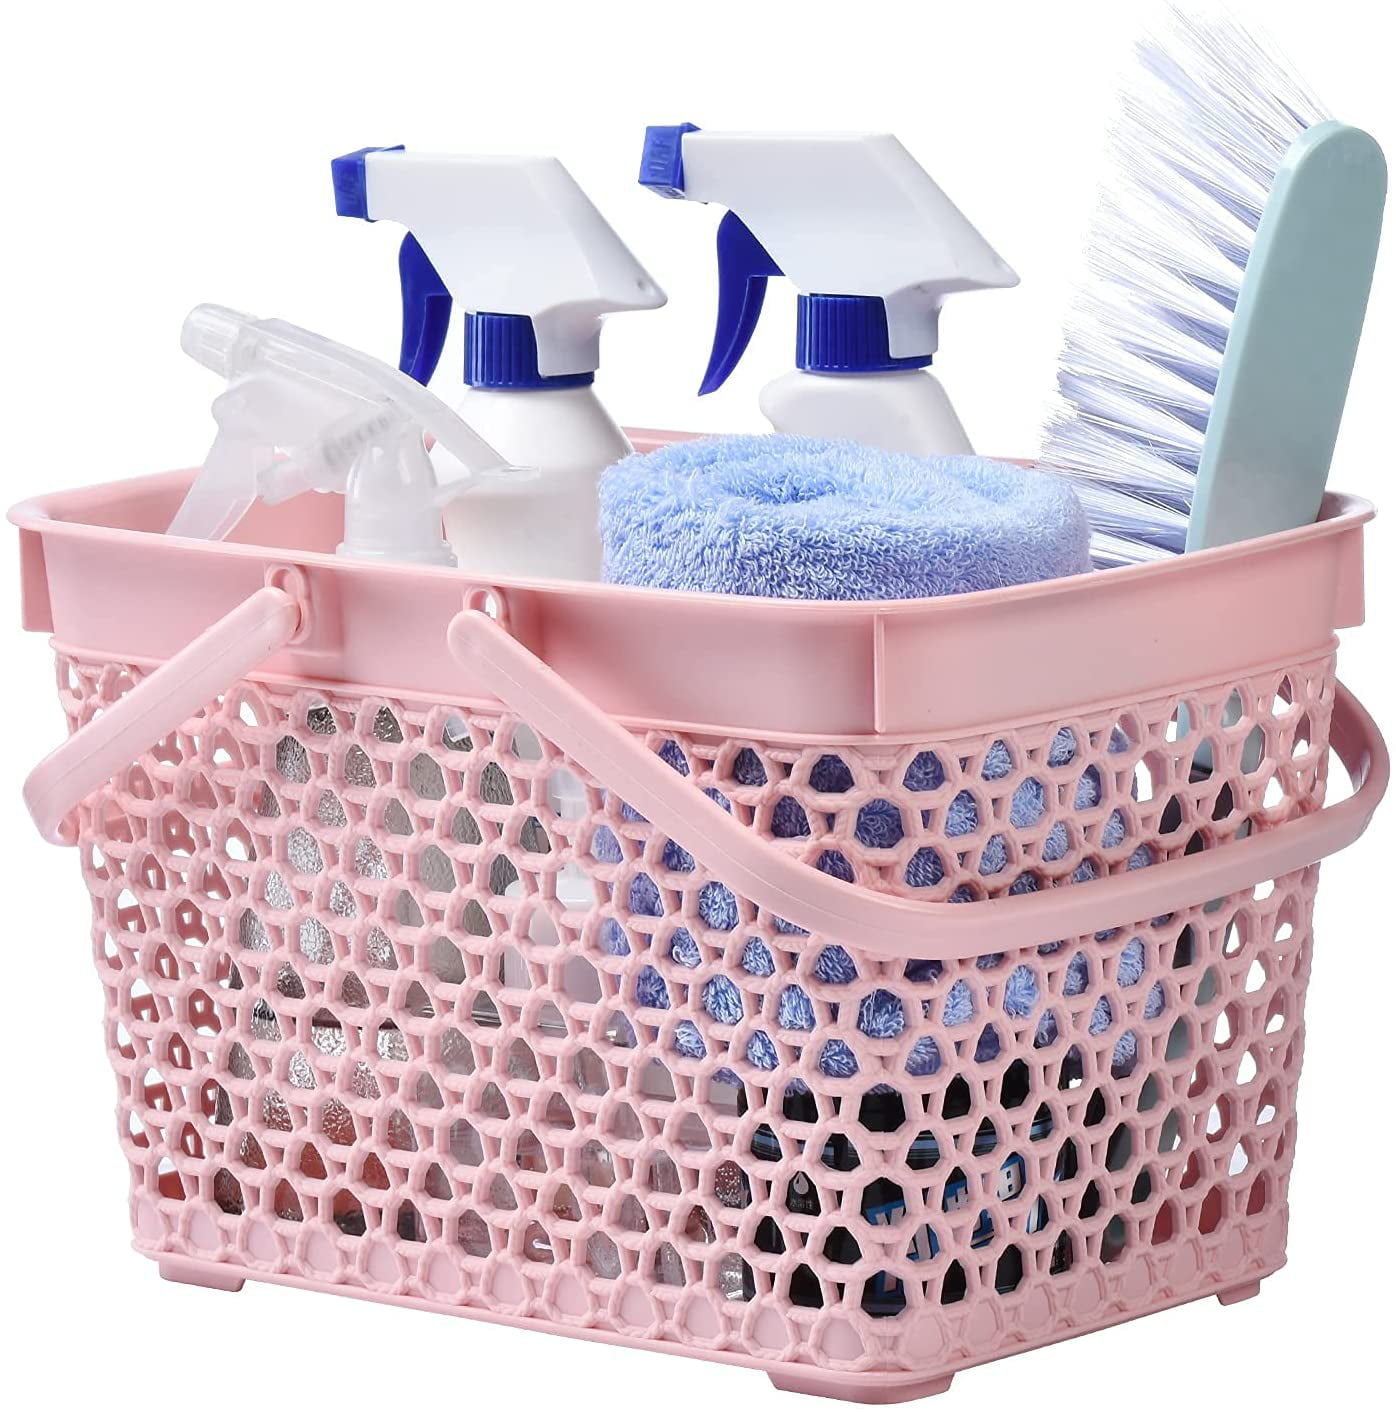 1pack Plastic Organizer Storage Baskets With Handles And Holes,caddy  Organizer For Bathroom Dorm And Kitchen,portable Bathroom Shower Cleaning  Caddy,s